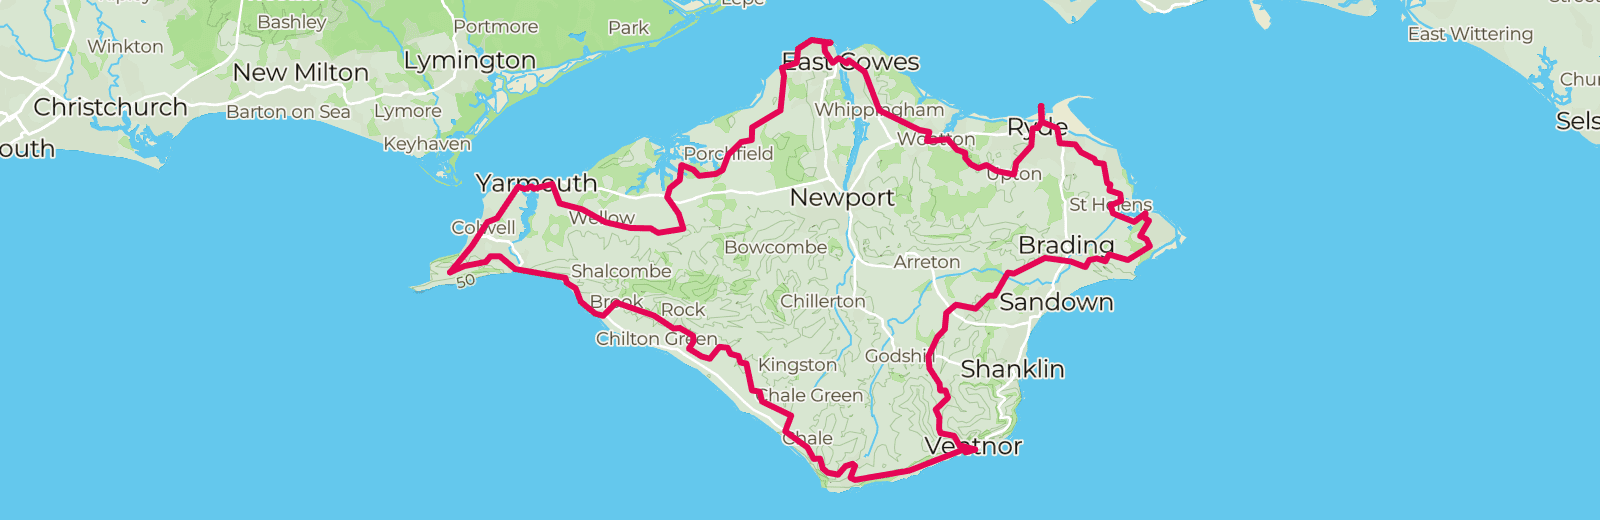 Map of Isle of Wight route